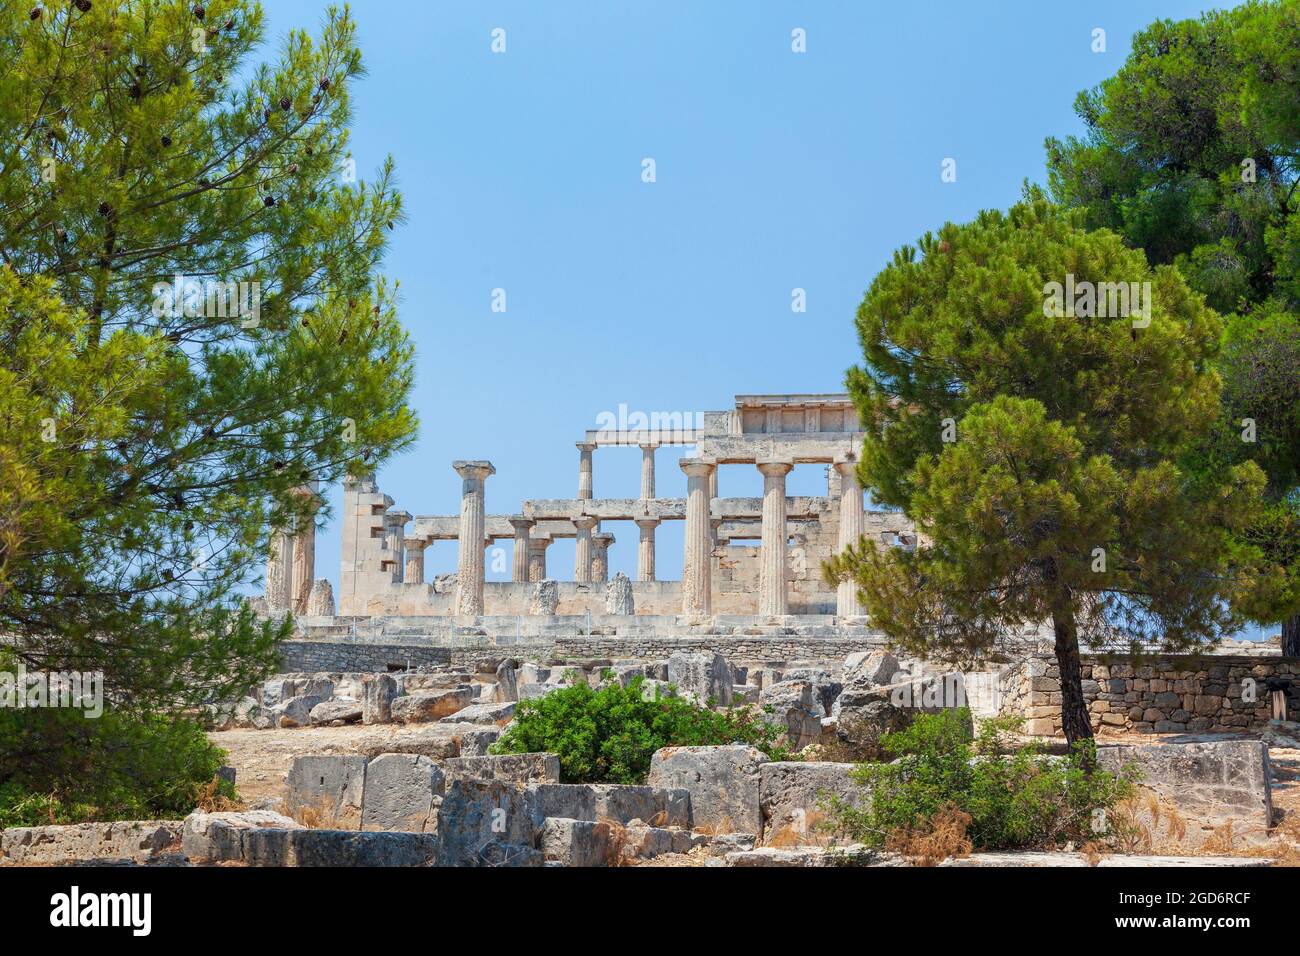 The Temple of Aphaia or Afea, a Doric temple in a sanctuary complex dedicated to the goddess Αthina Aphaia on the island of Aegina (Greece) of 500 BC Stock Photo